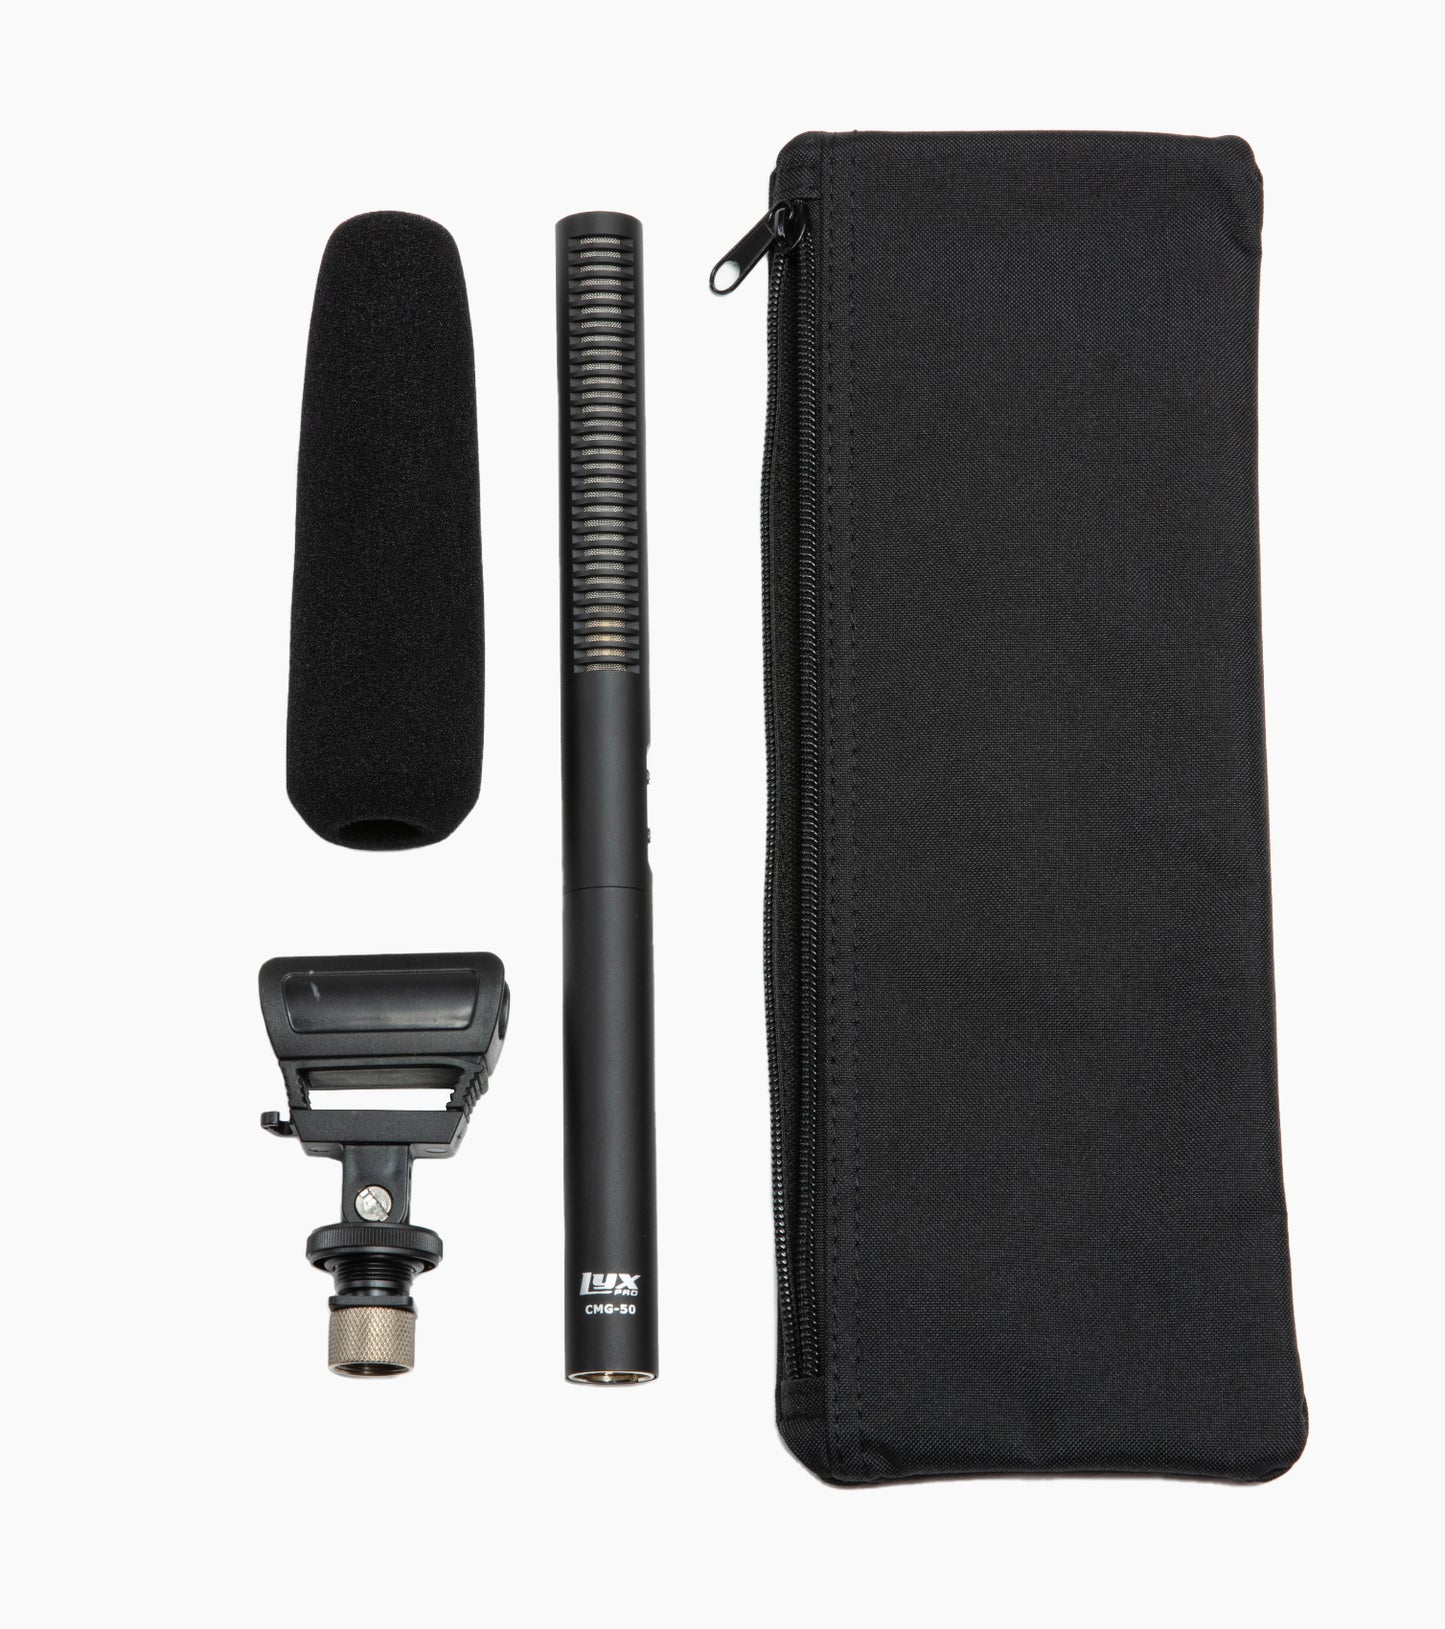 Shotgun Microphone with Shock Mount and Windscreen - Parts